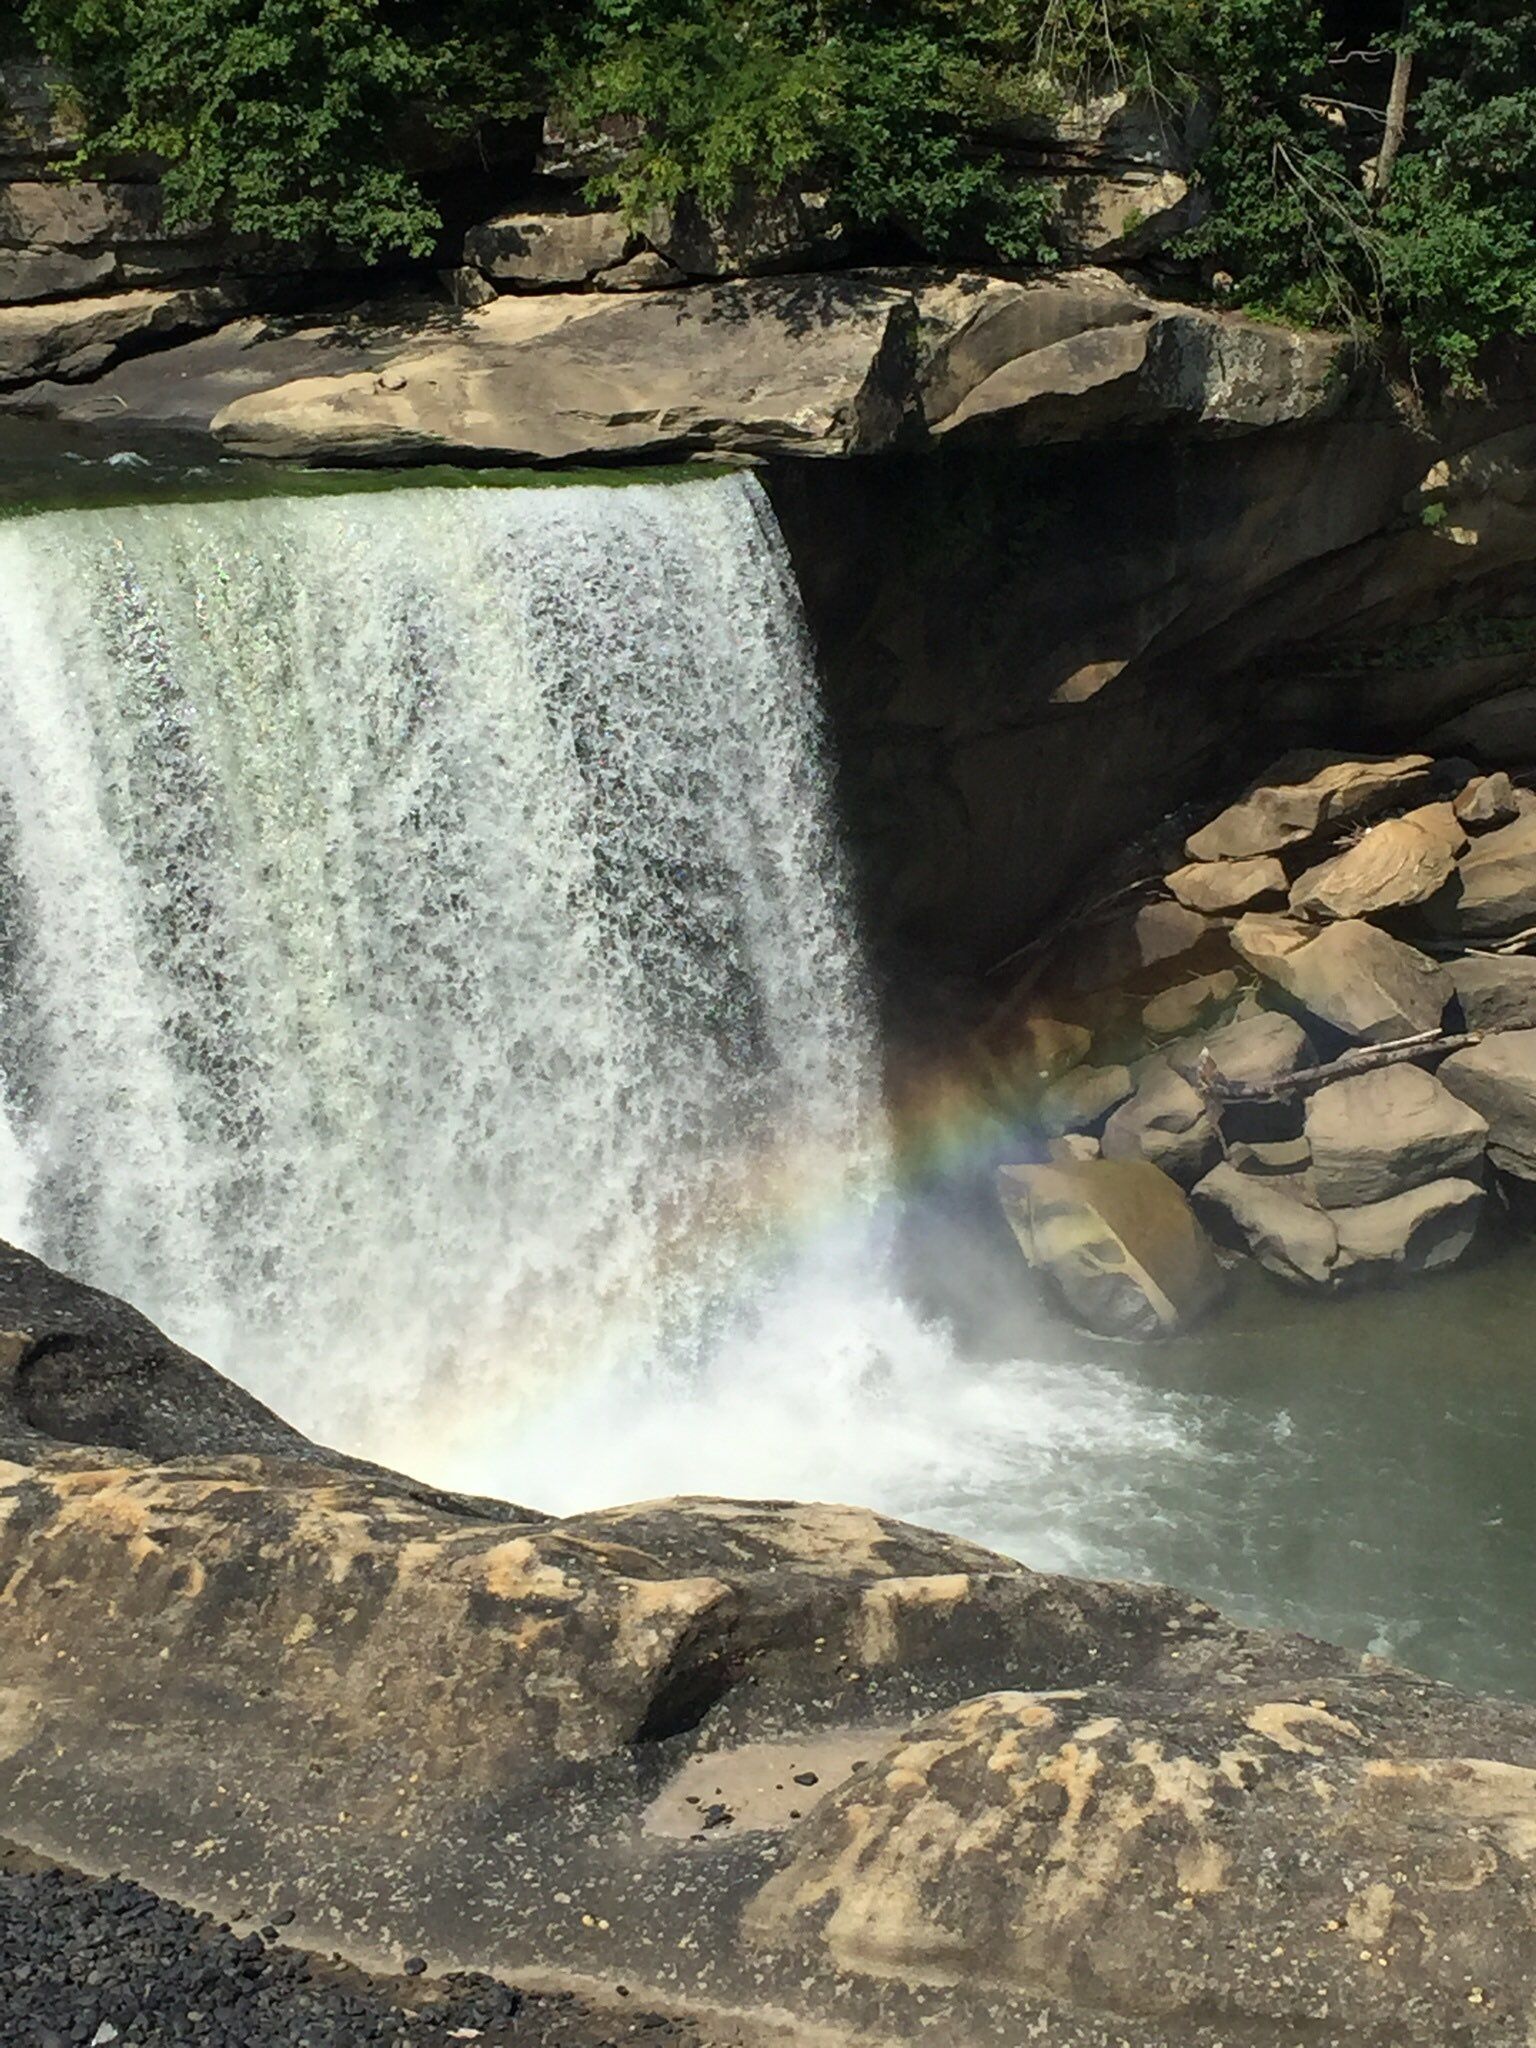 Small rainbow at the base of the falls